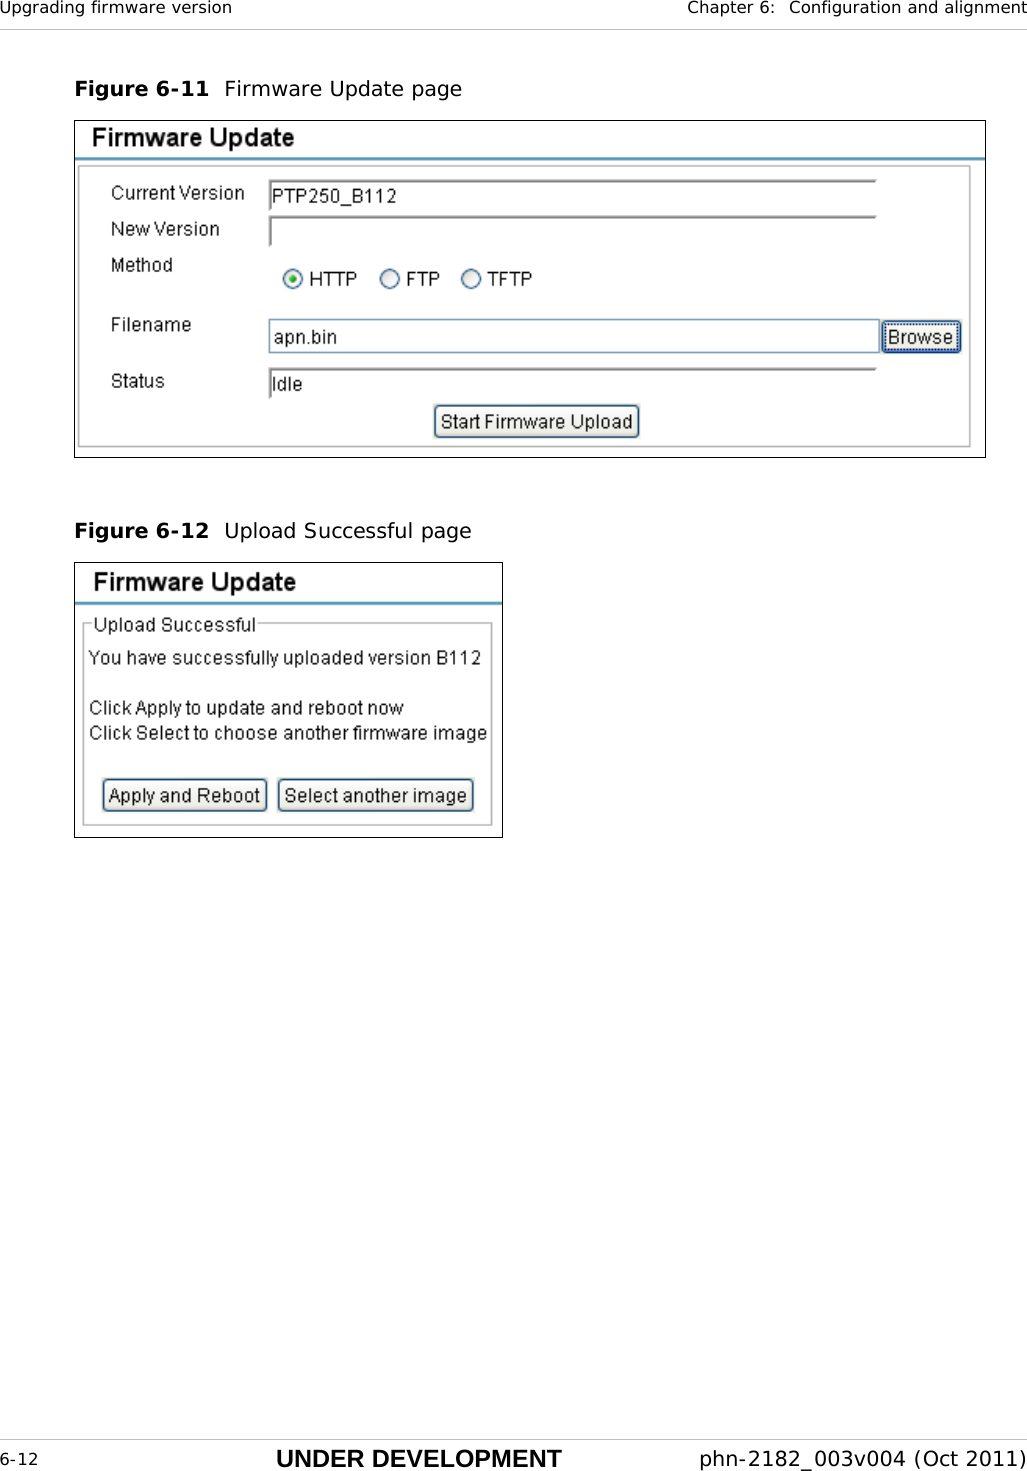 Upgrading firmware version  Chapter 6:  Configuration and alignment  6-12 UNDER DEVELOPMENT  phn-2182_003v004 (Oct 2011)  Figure 6-11  Firmware Update page   Figure 6-12  Upload Successful page       